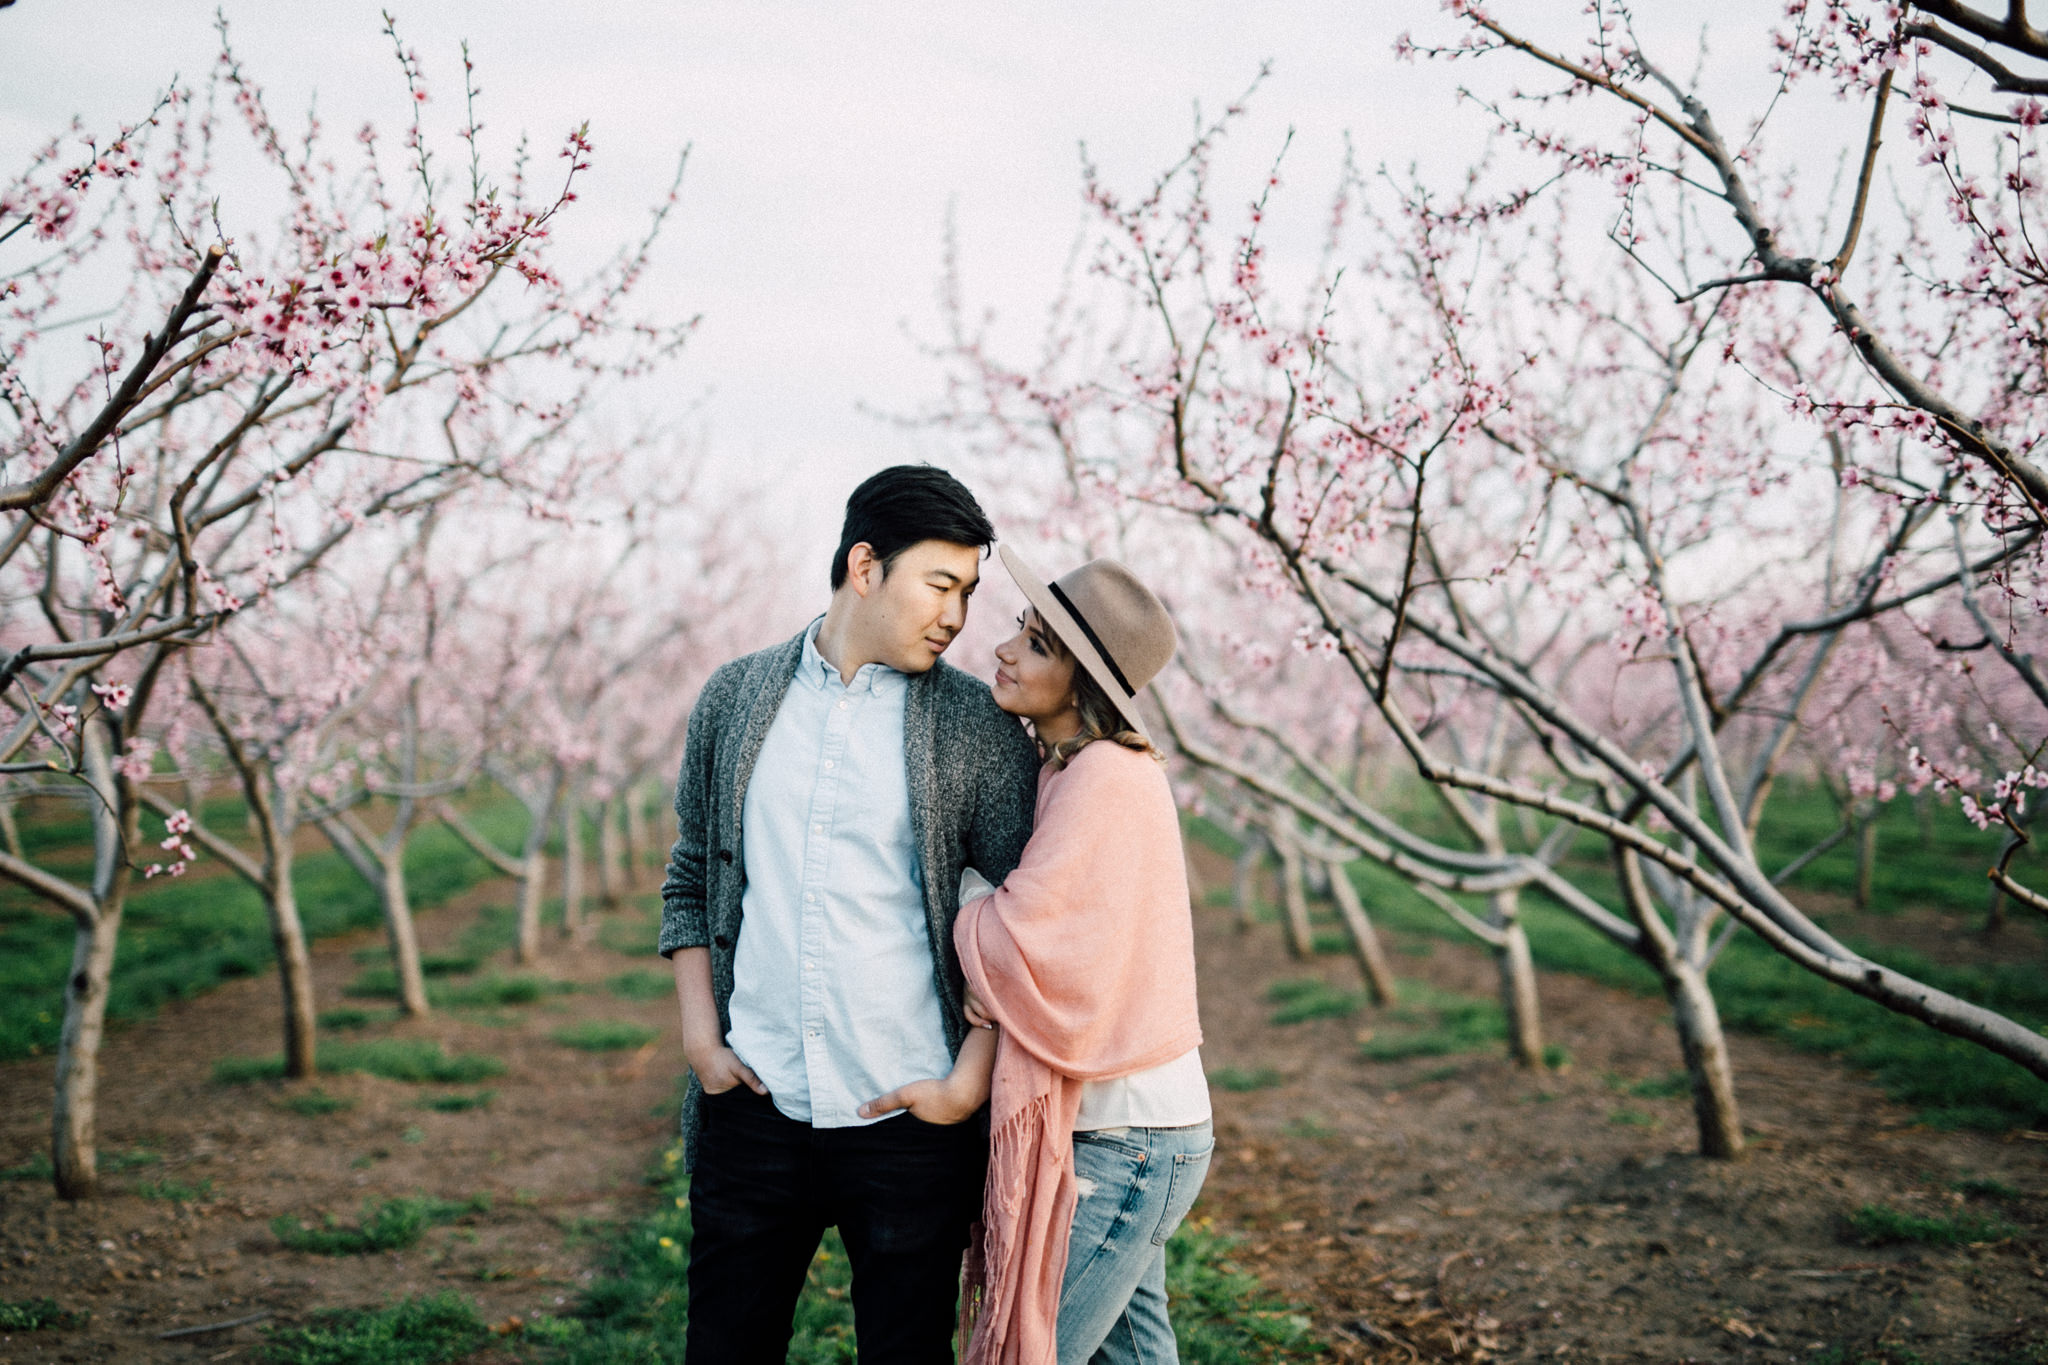 Niagara-Portrait-Session-Niagara-On-The-Lake-Cherry-Blossoms-photography-by-Simply-Lace-Photography-025.JPG